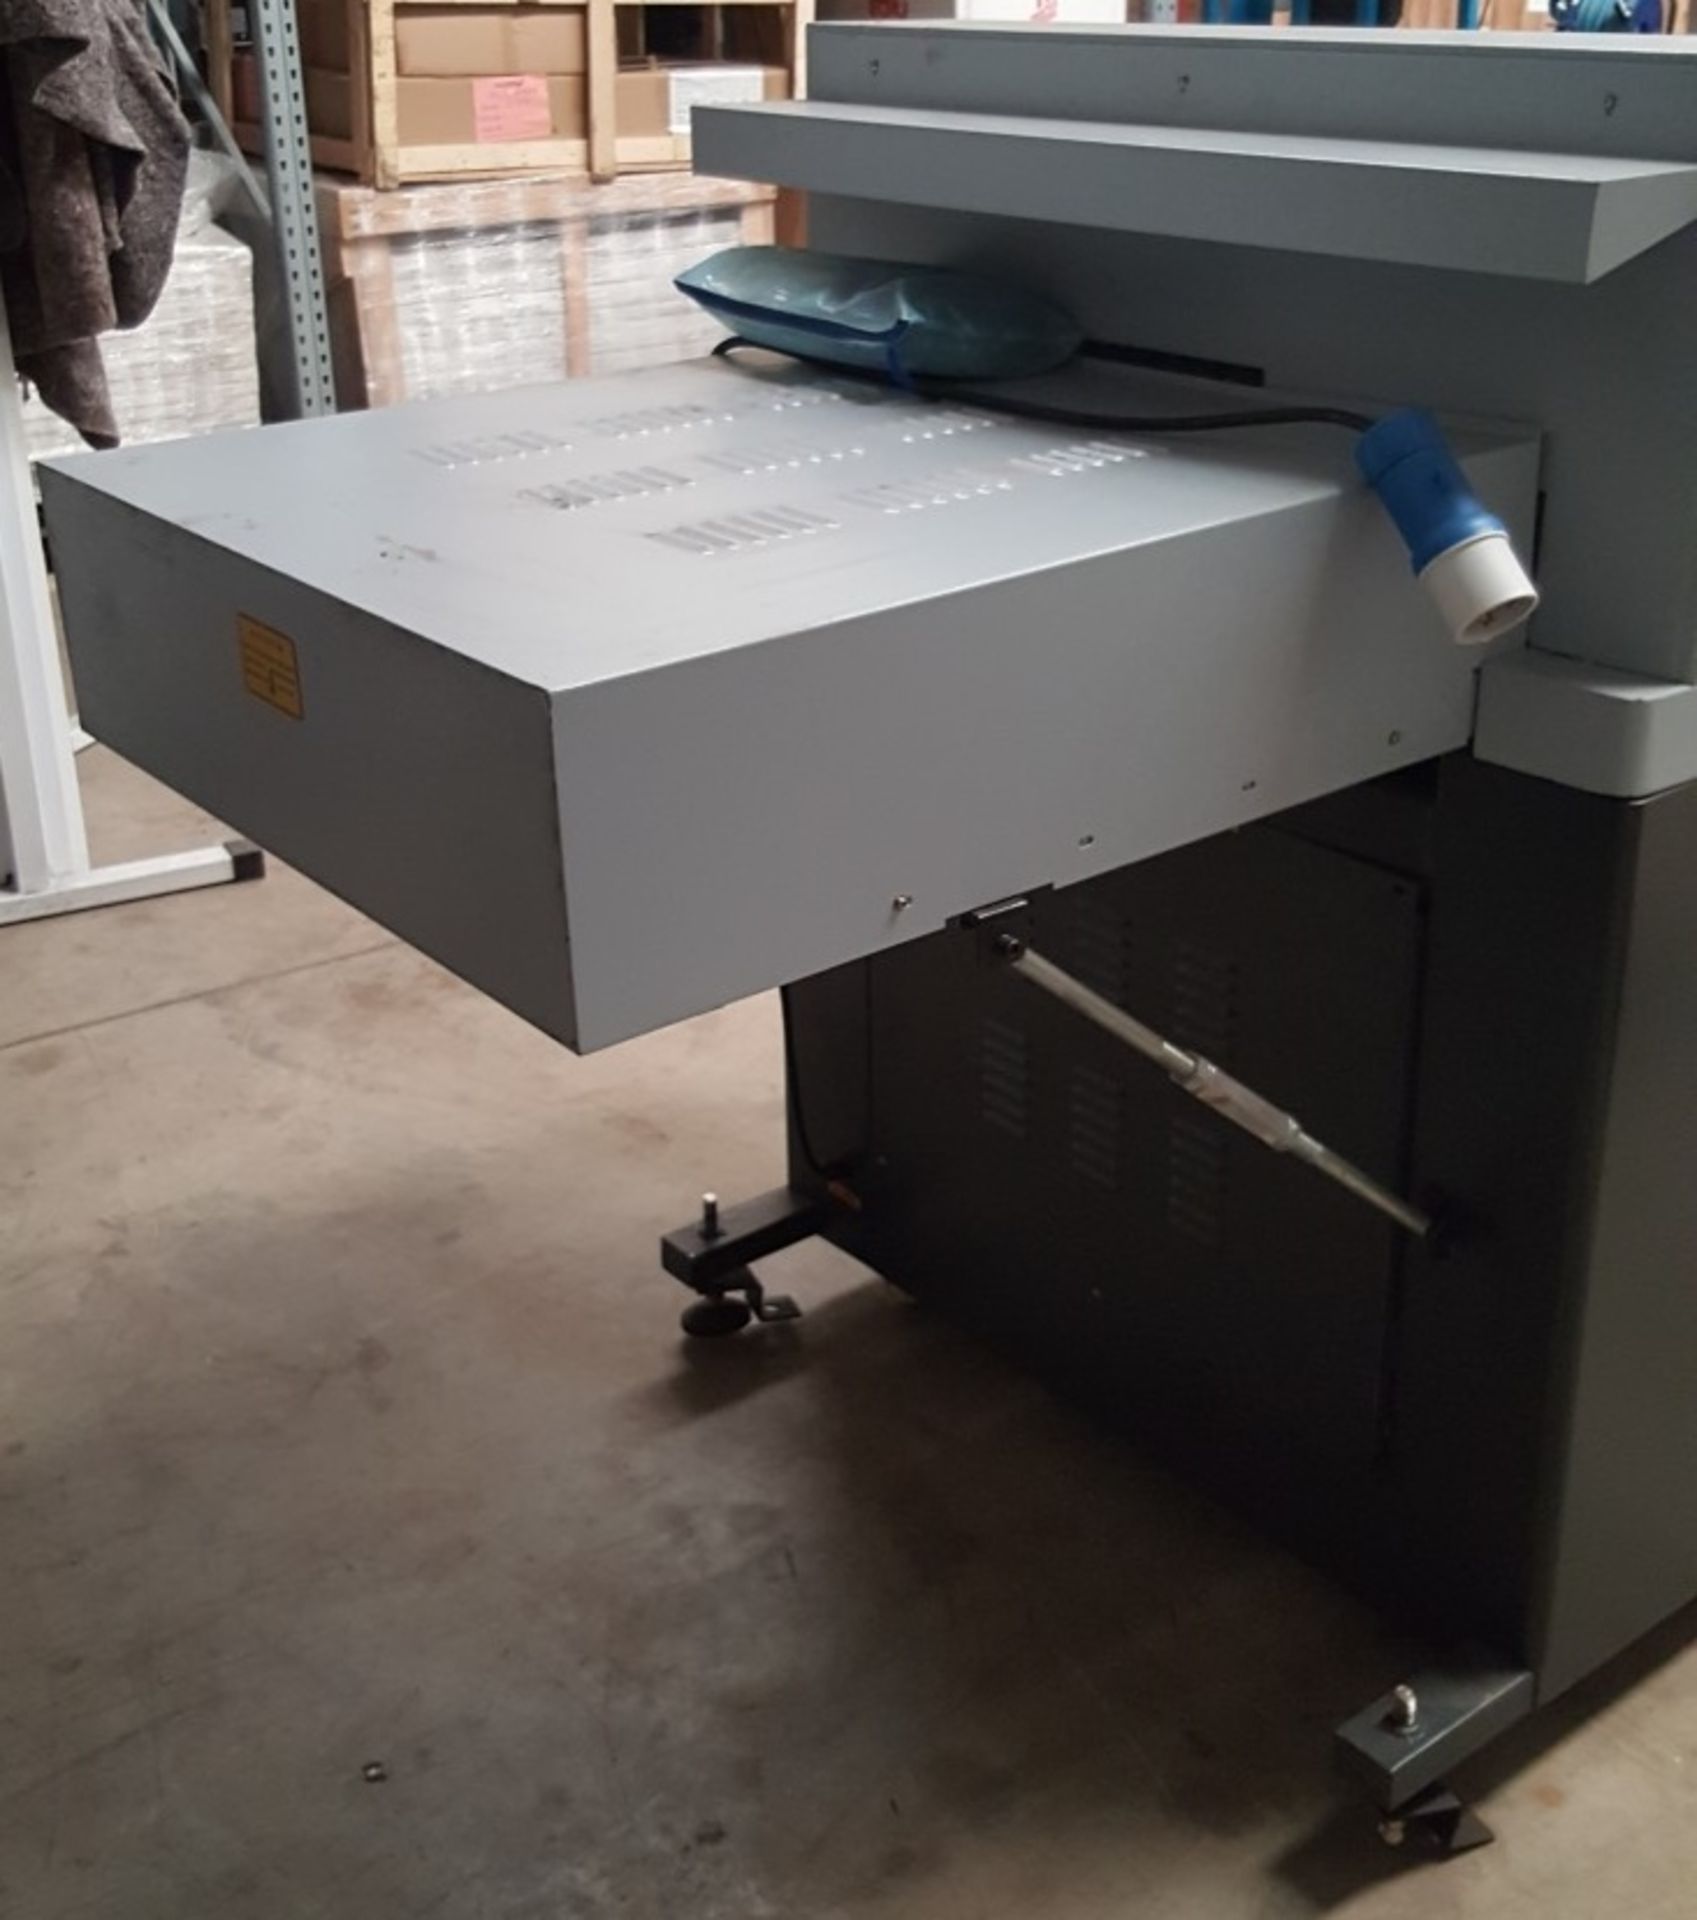 1 x Docon DC-8670HP Hydraulic Paper Guillotine - Heavy Duty Paper Cutting Machine - Image 6 of 10